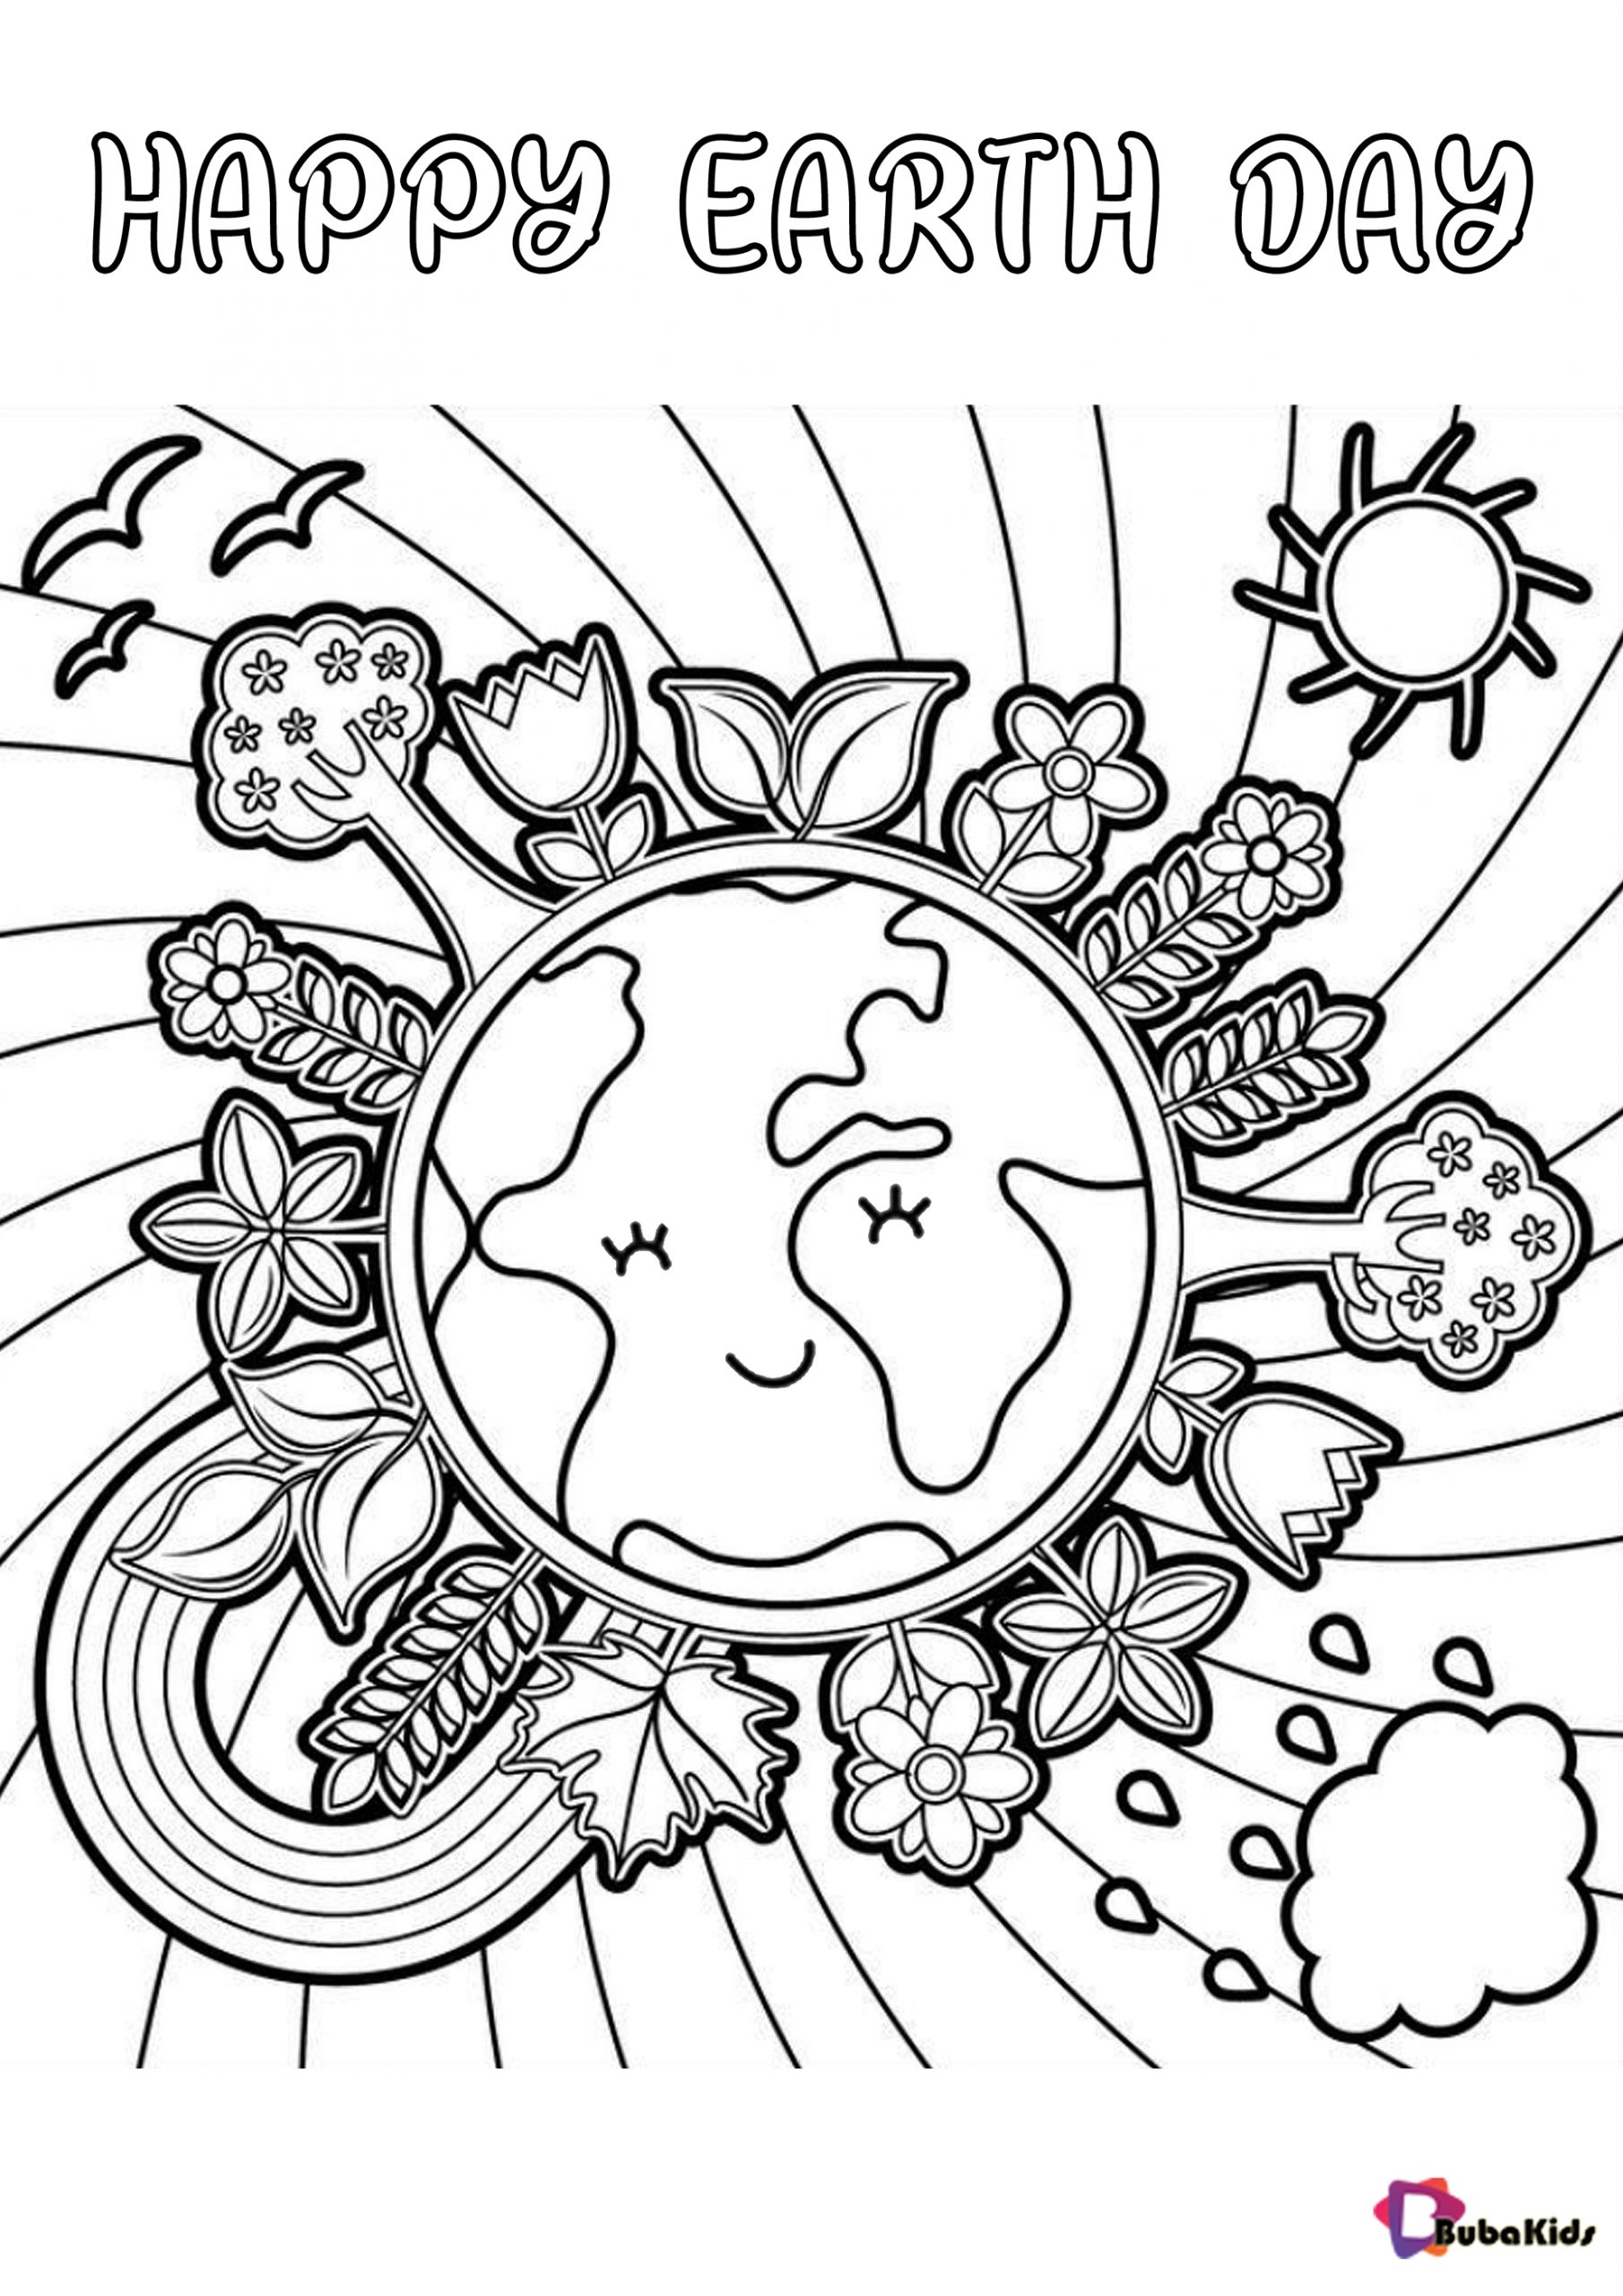 Free download happy earth day coloring sheet Wallpaper